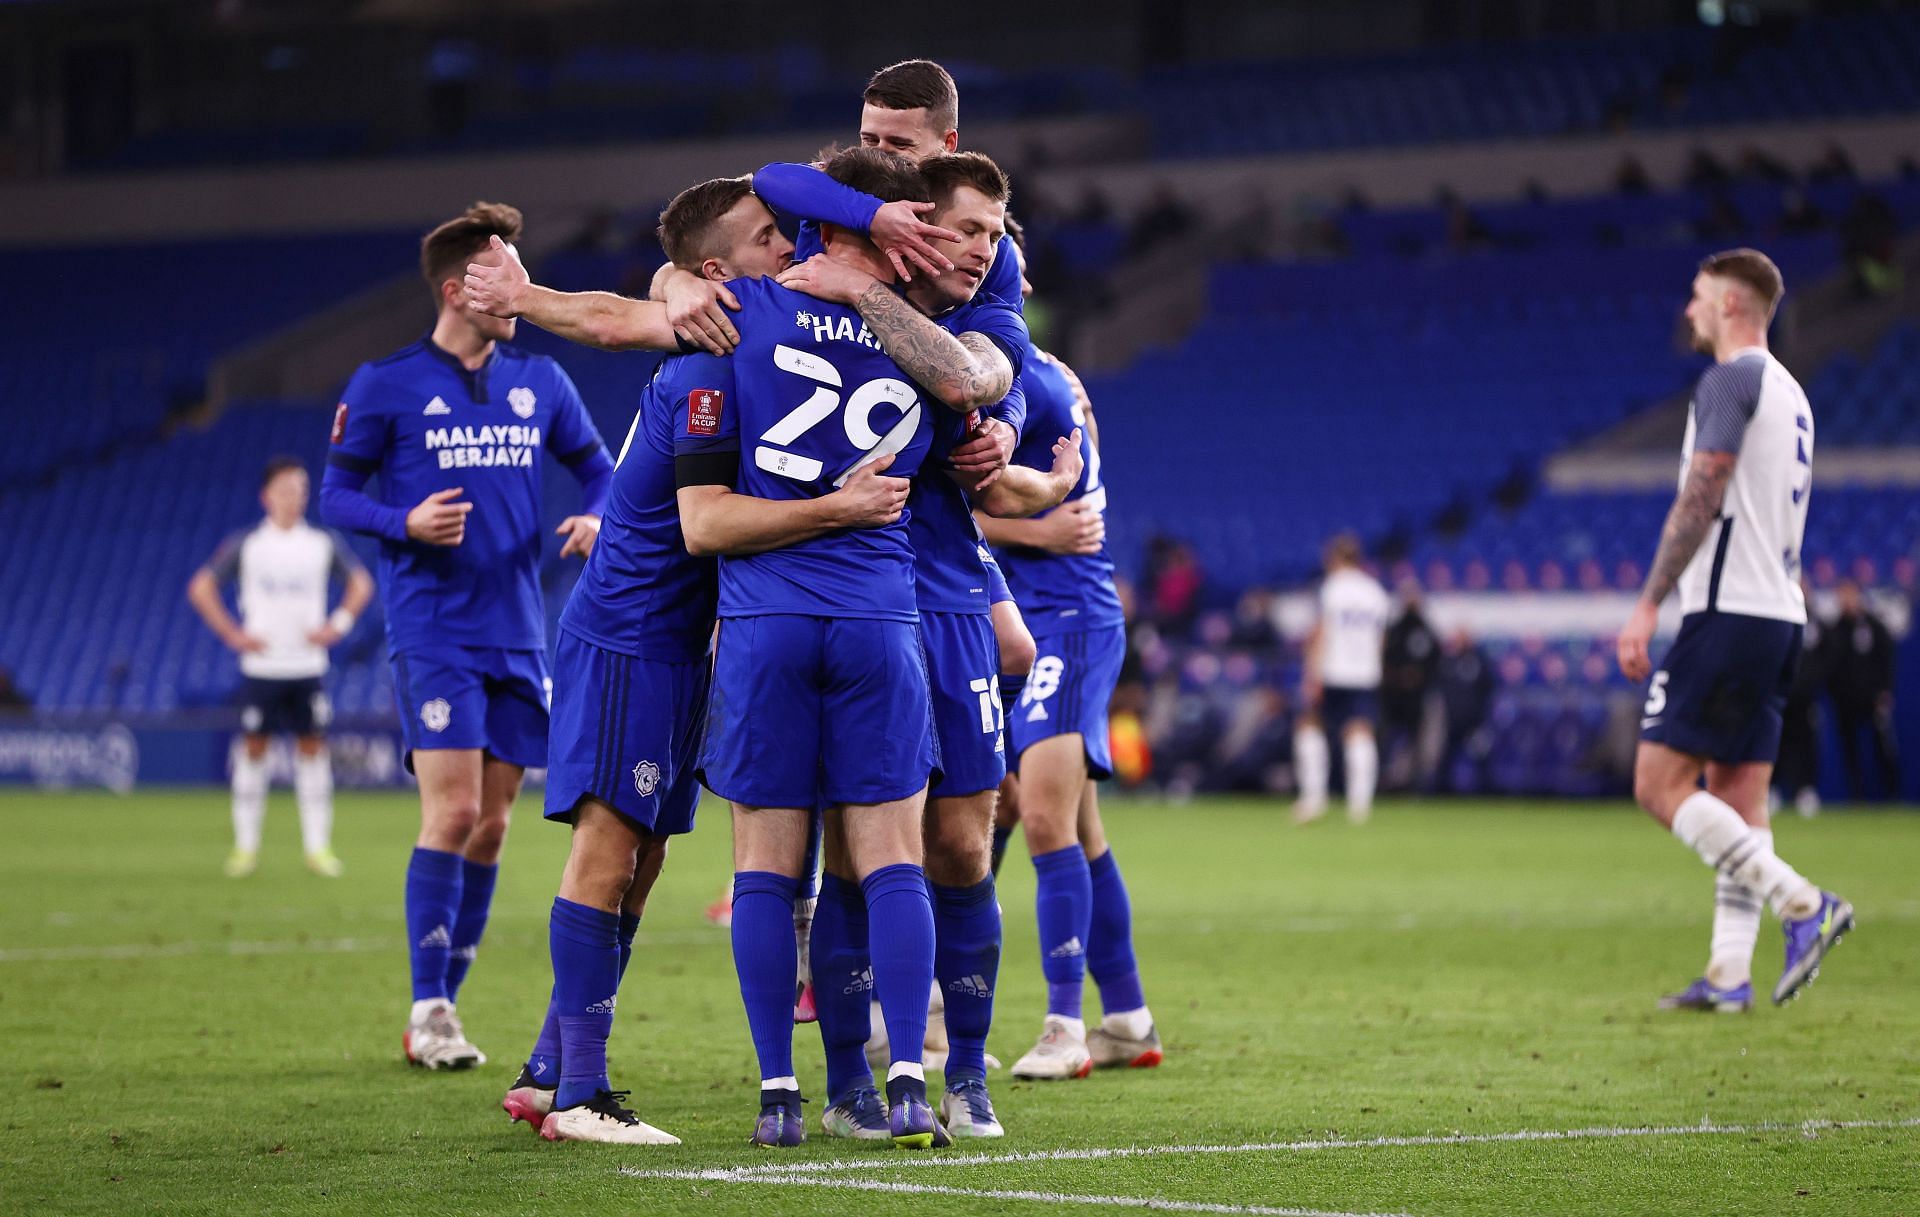 Cardiff City will face Reading on Saturday